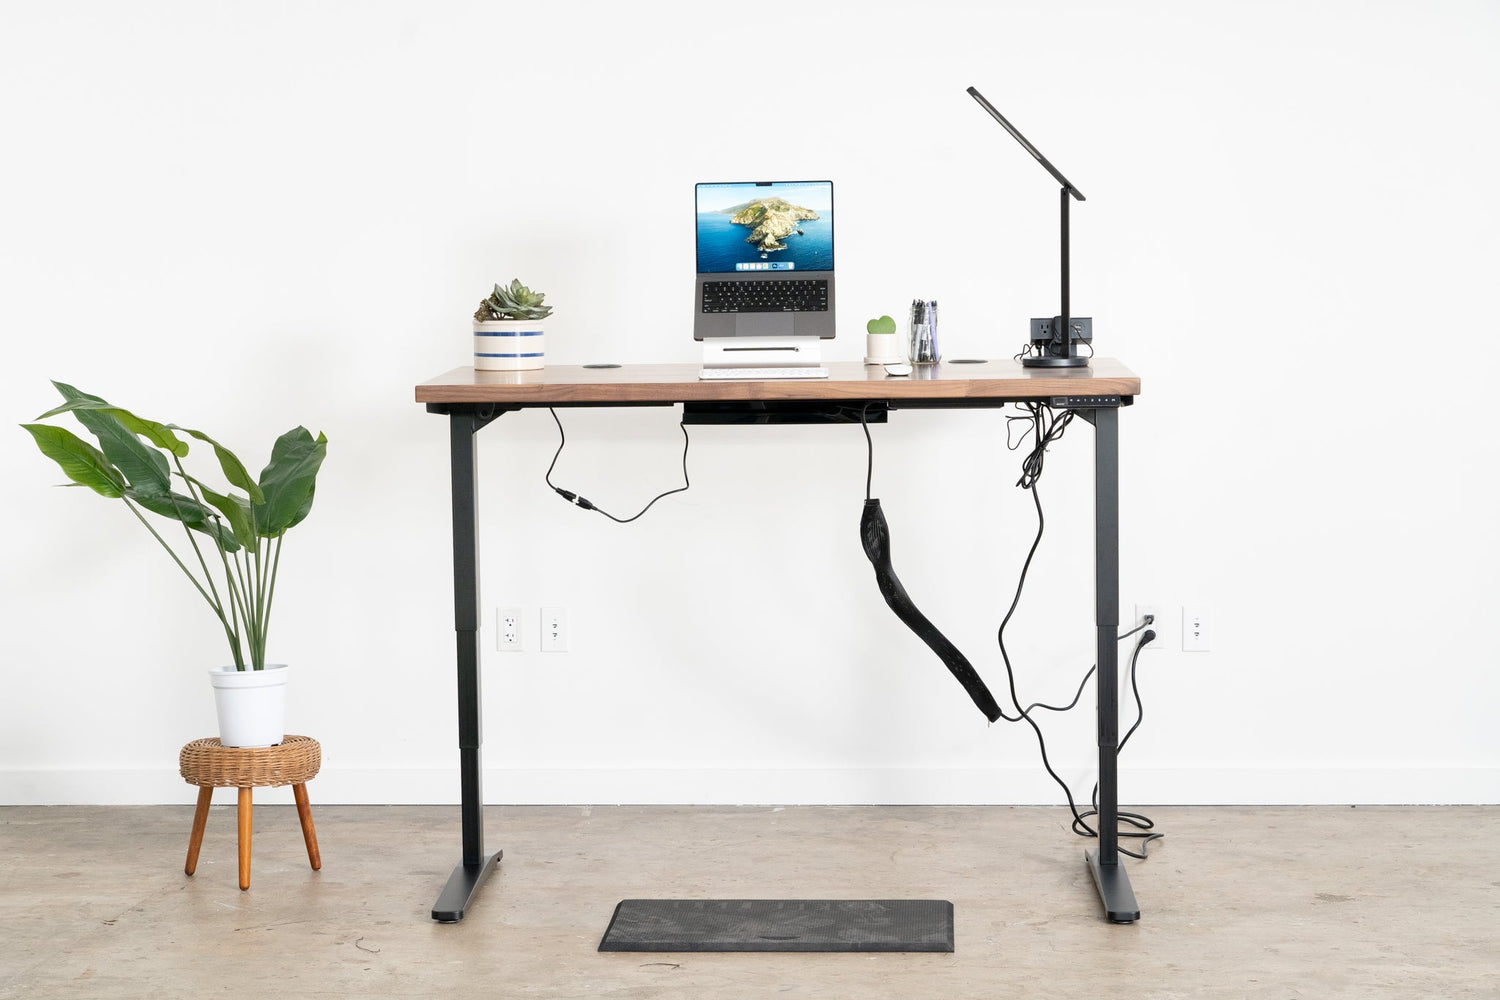 What Are the Most Important Standing Desk Features?